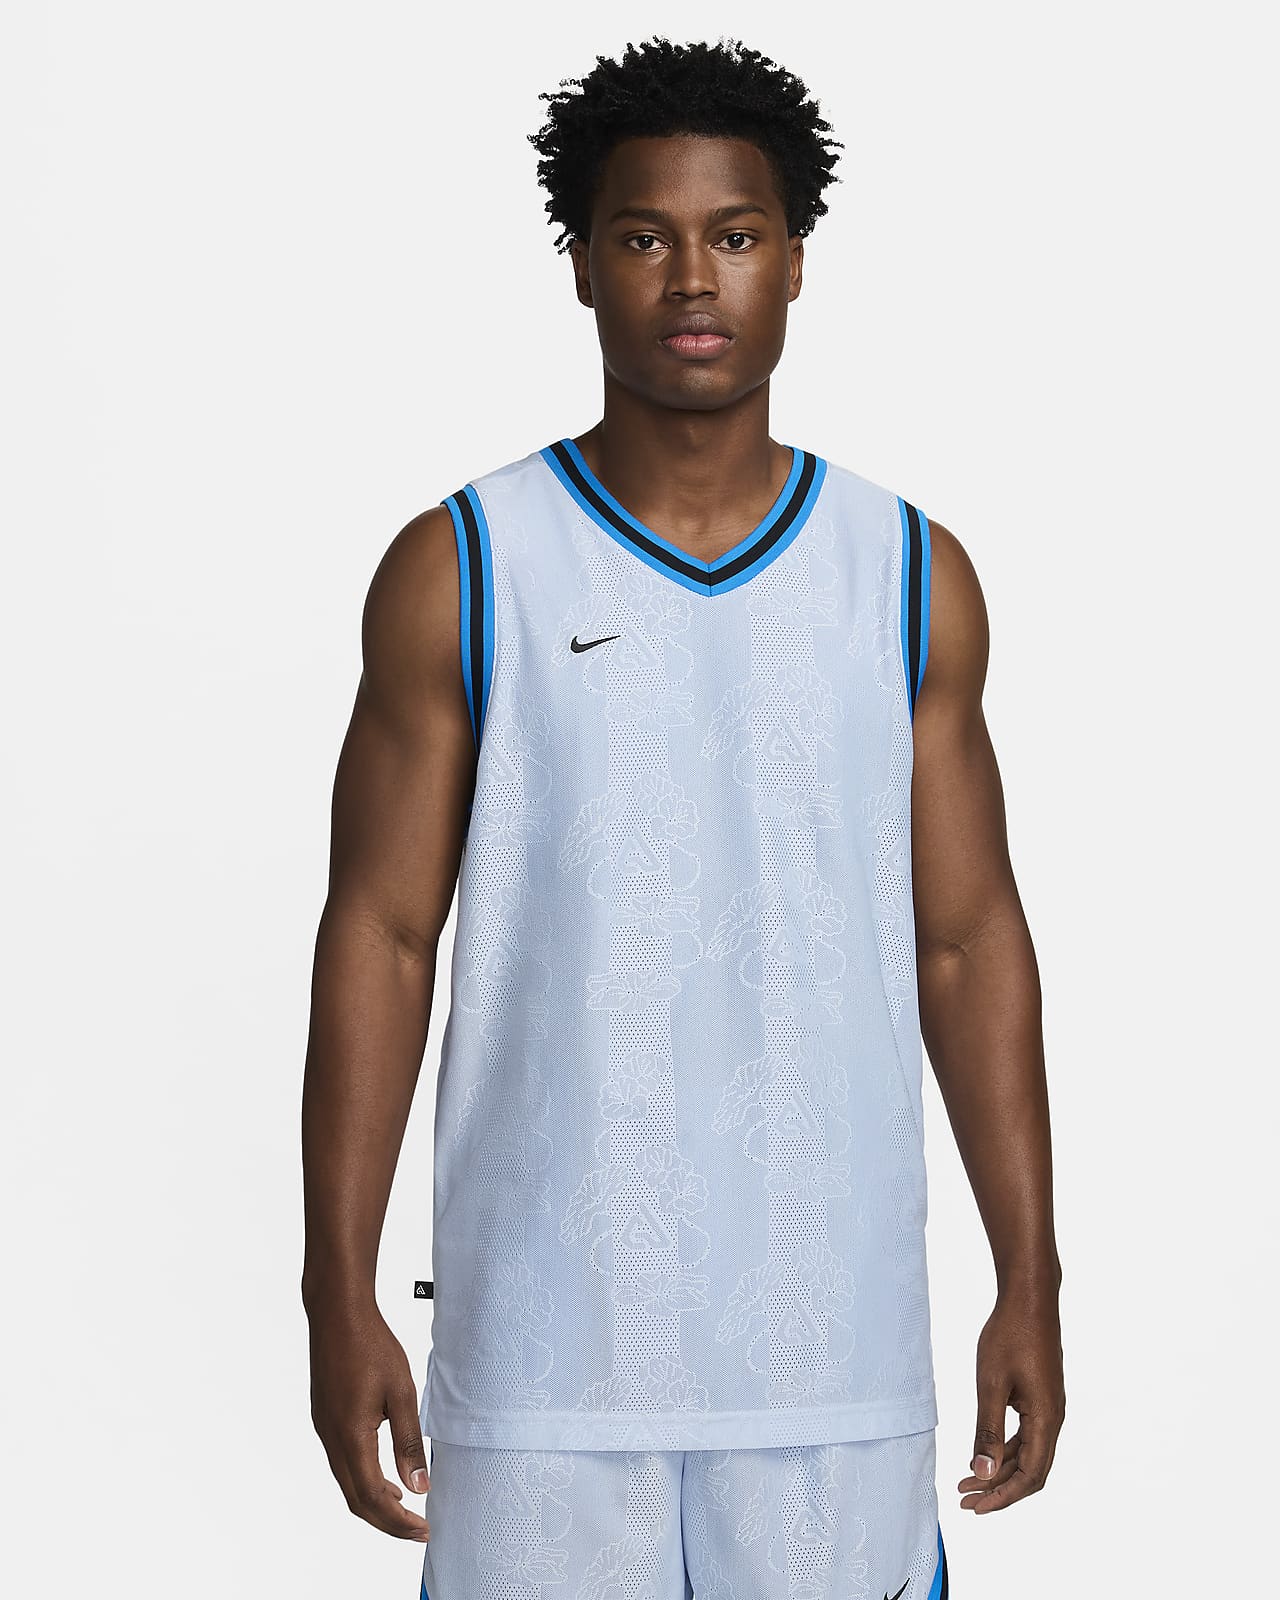 giannis jersey youth xs